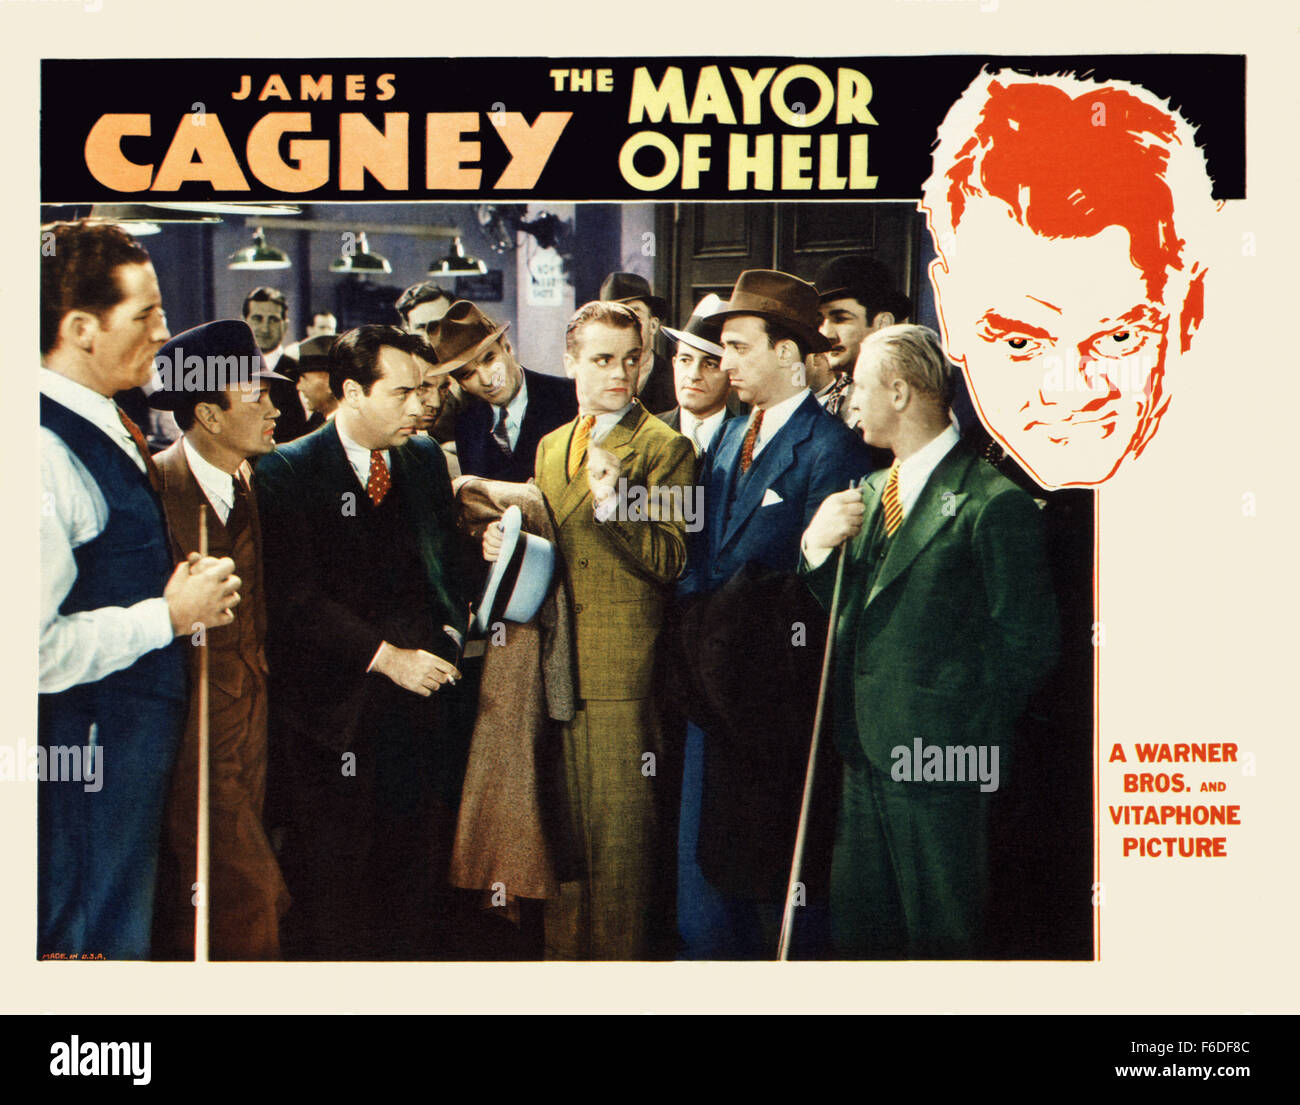 RELEASE DATE: June 24, 1933. MOVIE TITLE: The Mayor of Hell. STUDIO: Warner Bros. Pictures. PLOT: Five members of a teen-age gang, including leader Jimmy Smith, are sent to the State Reformatory, presided over by the melodramatically callous Thompson. Soon, Patsy Gargan, a former gangster appointed Deputy Commissioner as a political favor, arrives complete with hip flask and blonde. Gargan falls for activist nurse Dorothy and, inspired by her, takes over the administration to run the place on radical principles. But Thompson, to conceal his years of graft, needs a quick way to discredit Gargan Stock Photo